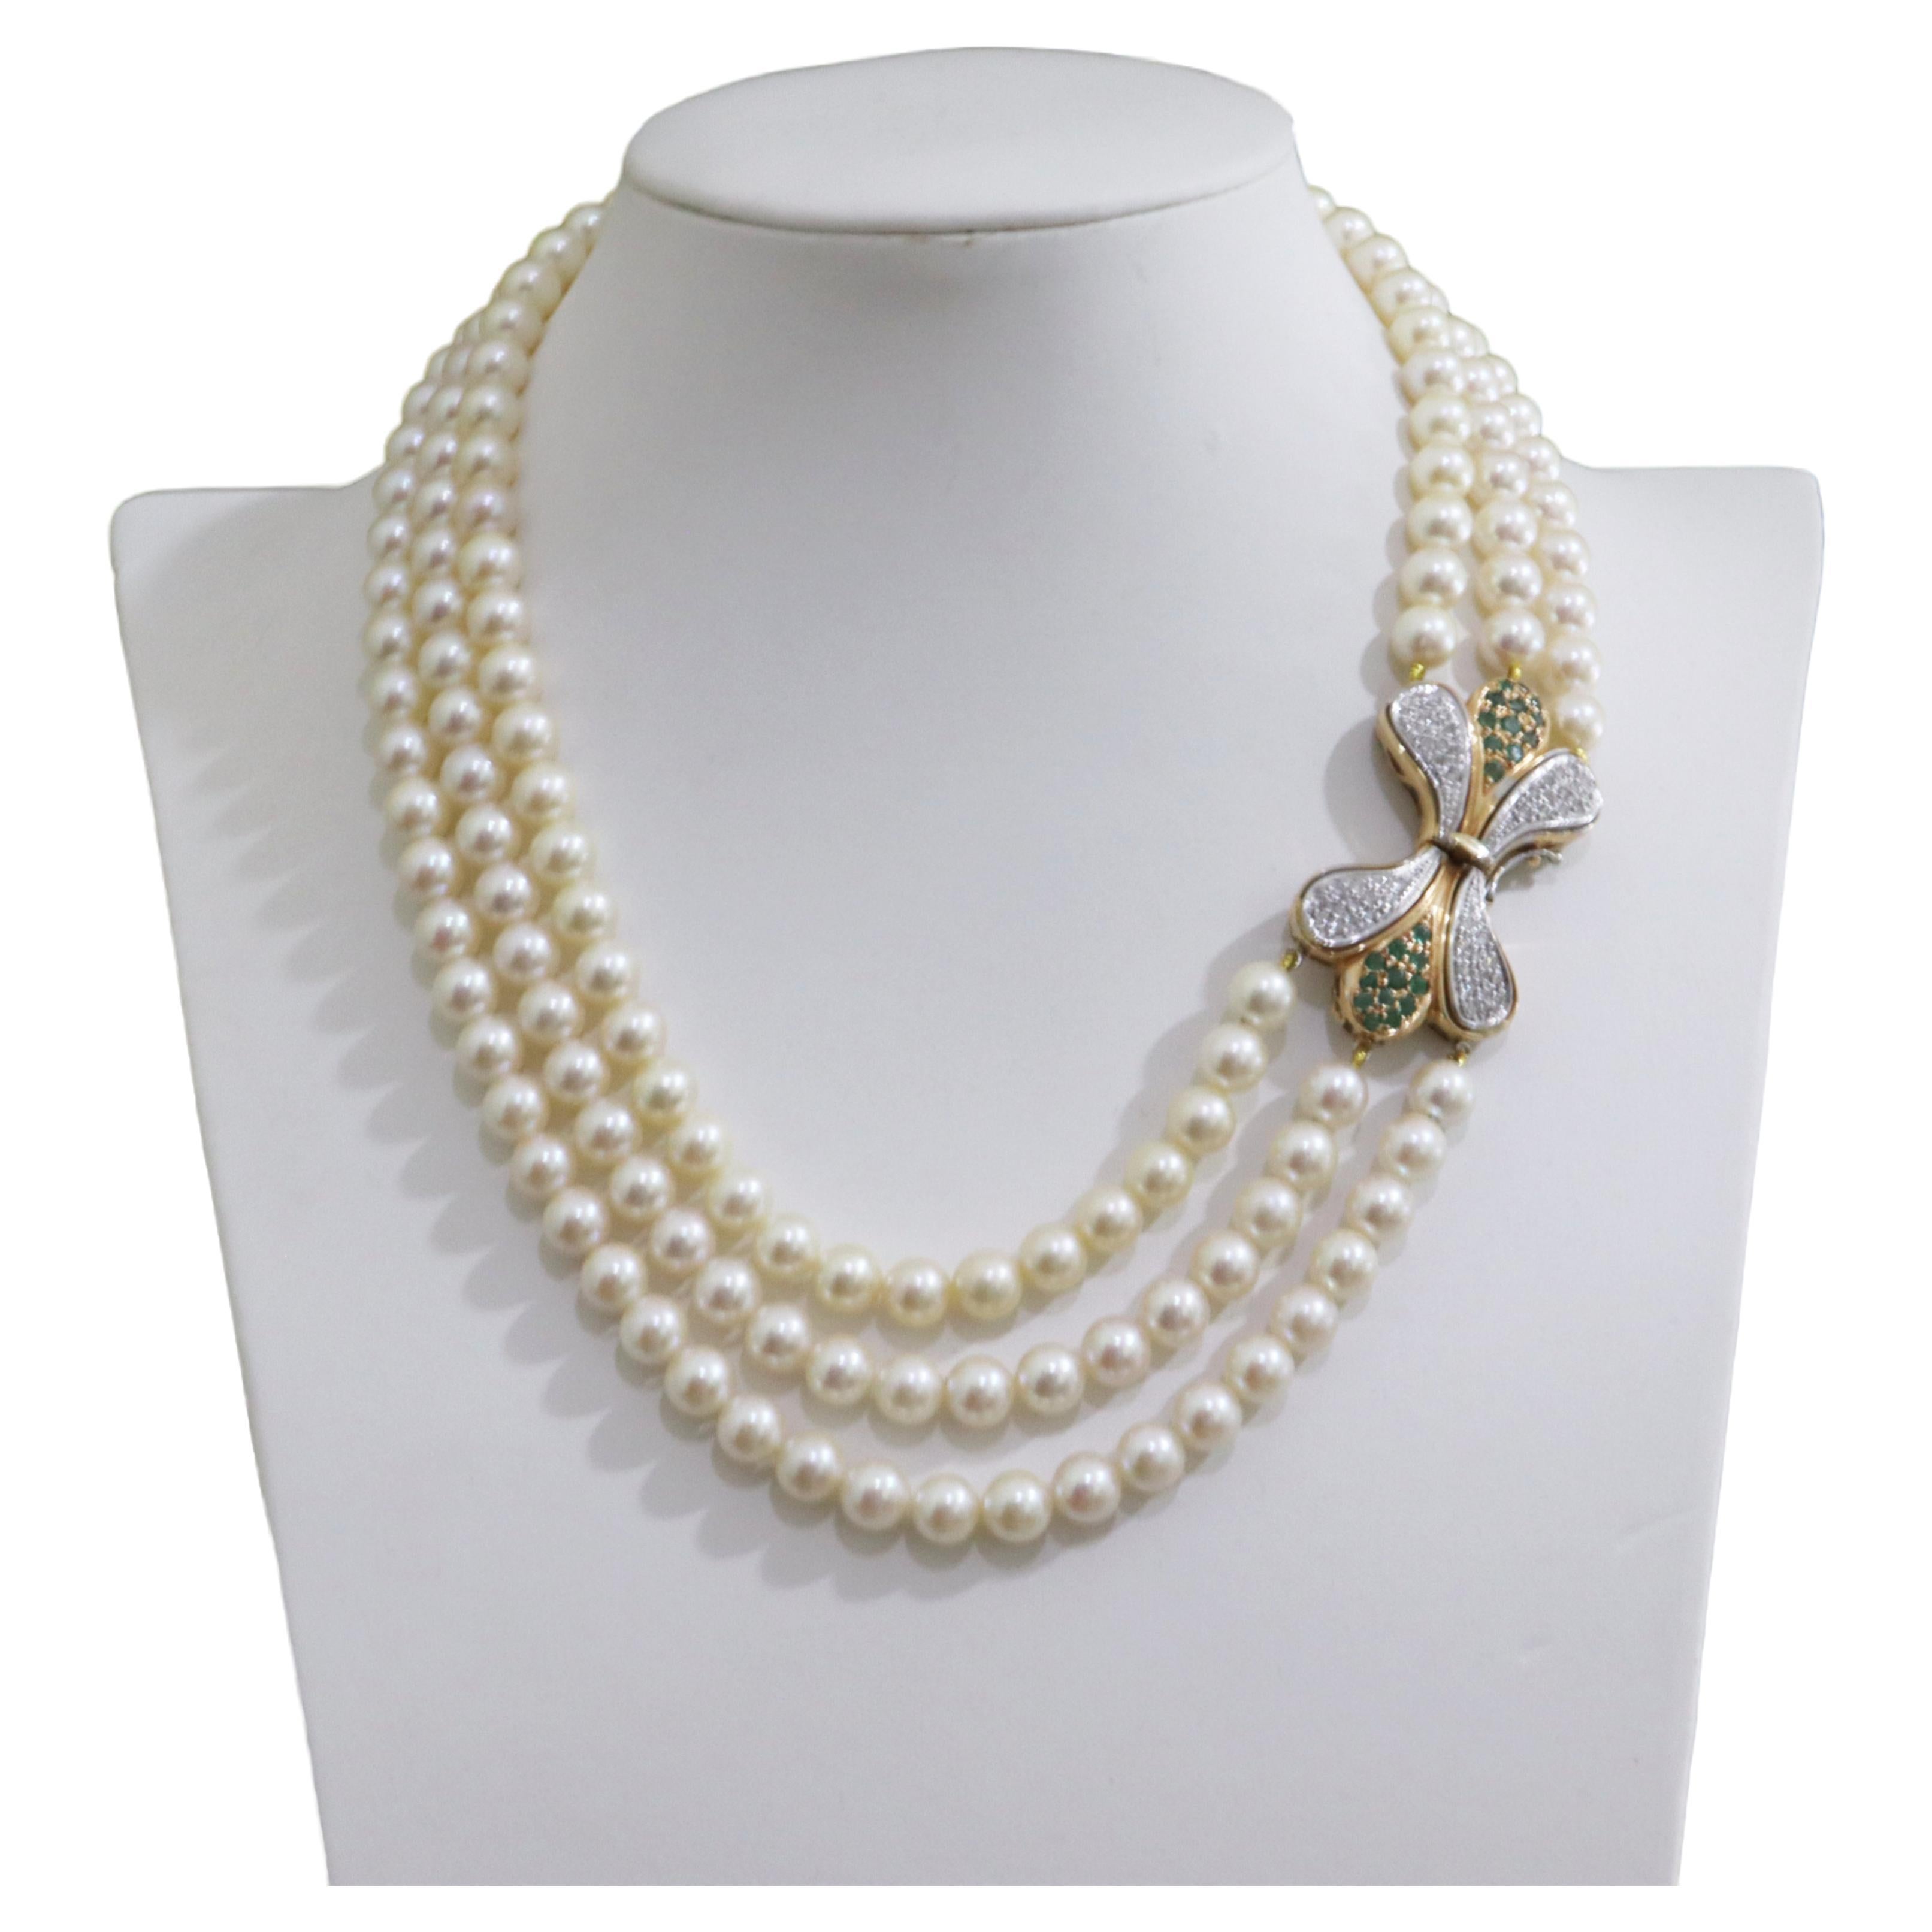 Pearls Diamonds Emeralds 18 Karat White And Yellow Gold Multi-Strand Necklace For Sale